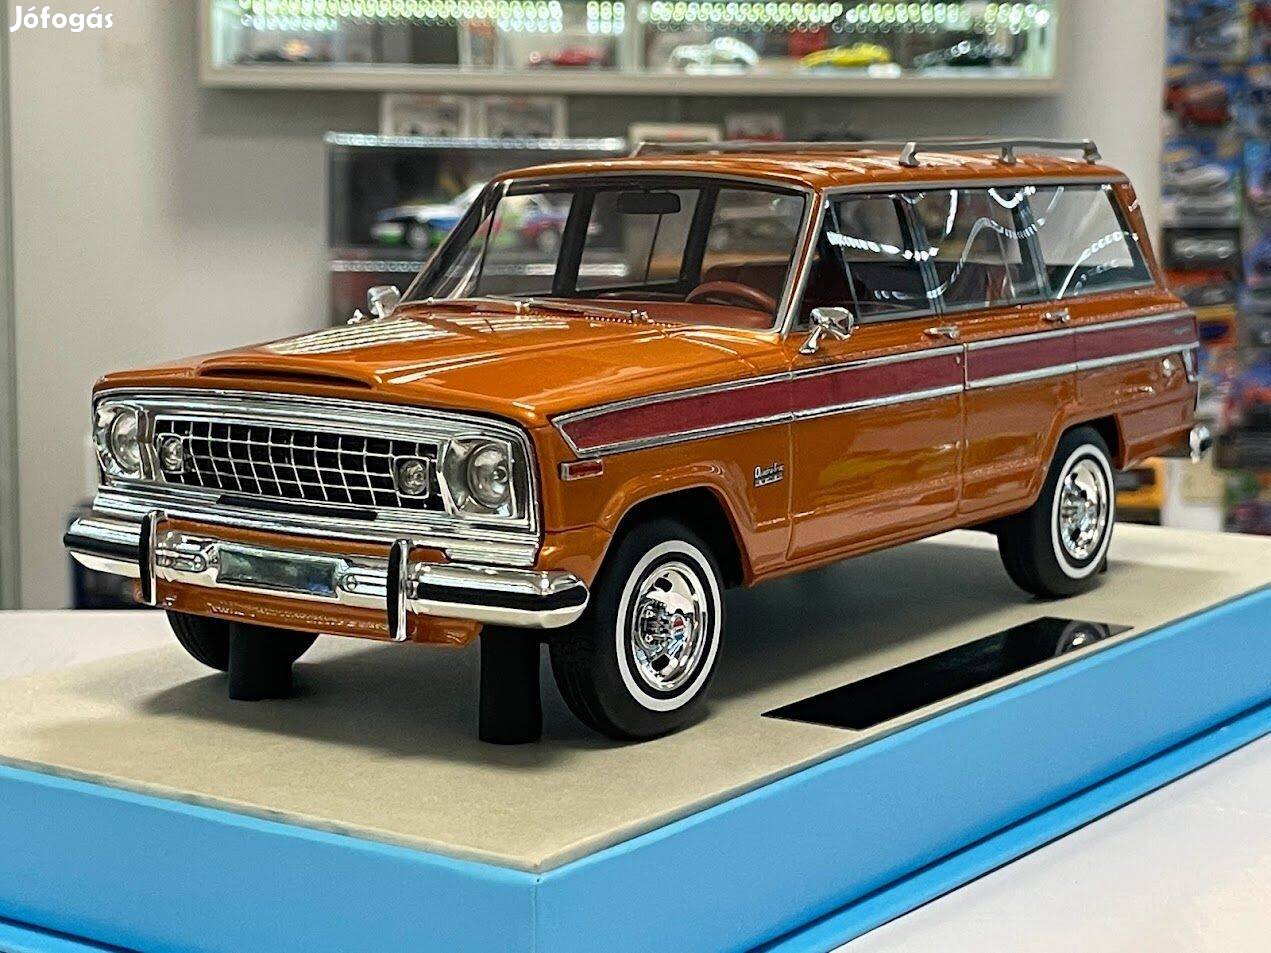 Jeep Grand Wagoneer 1979 1:18 1/18 LS-Collectibles LS037B resin